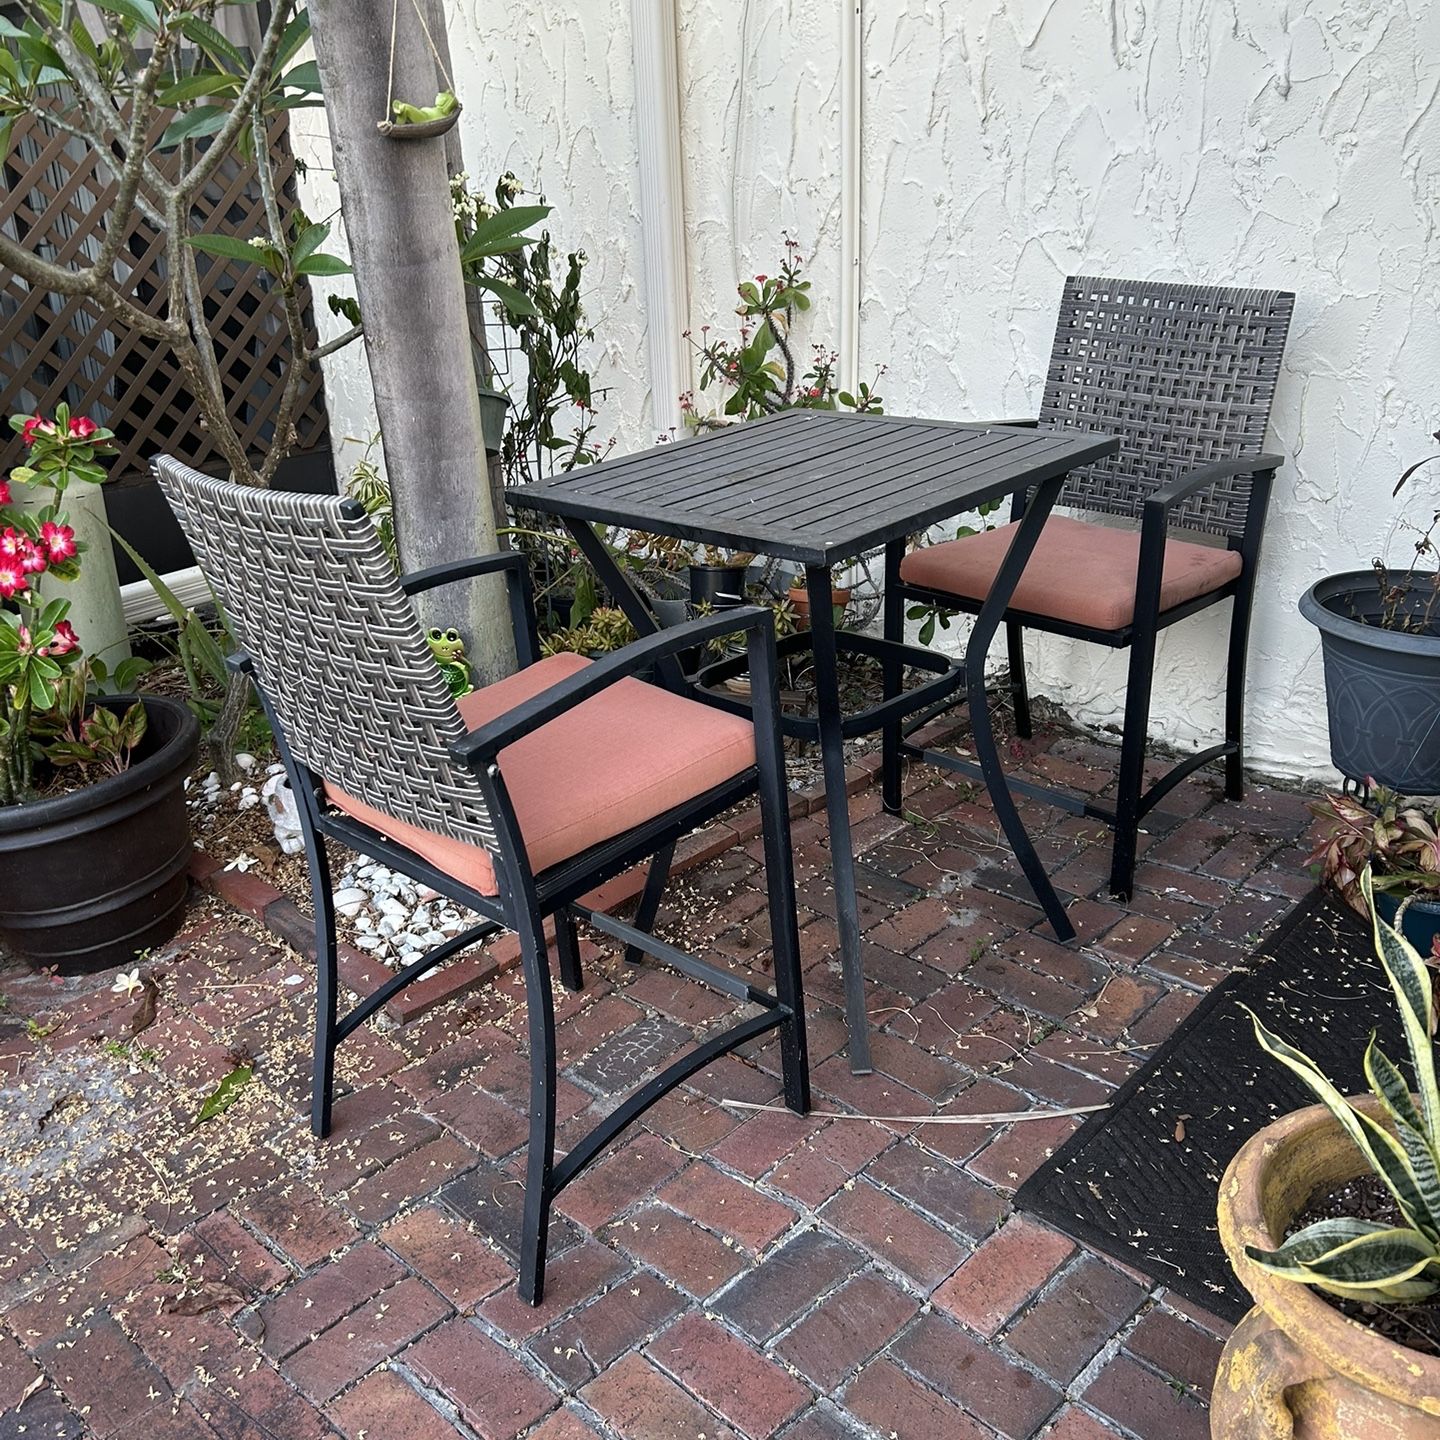 Patio High Chairs And Table (3ft Tall)